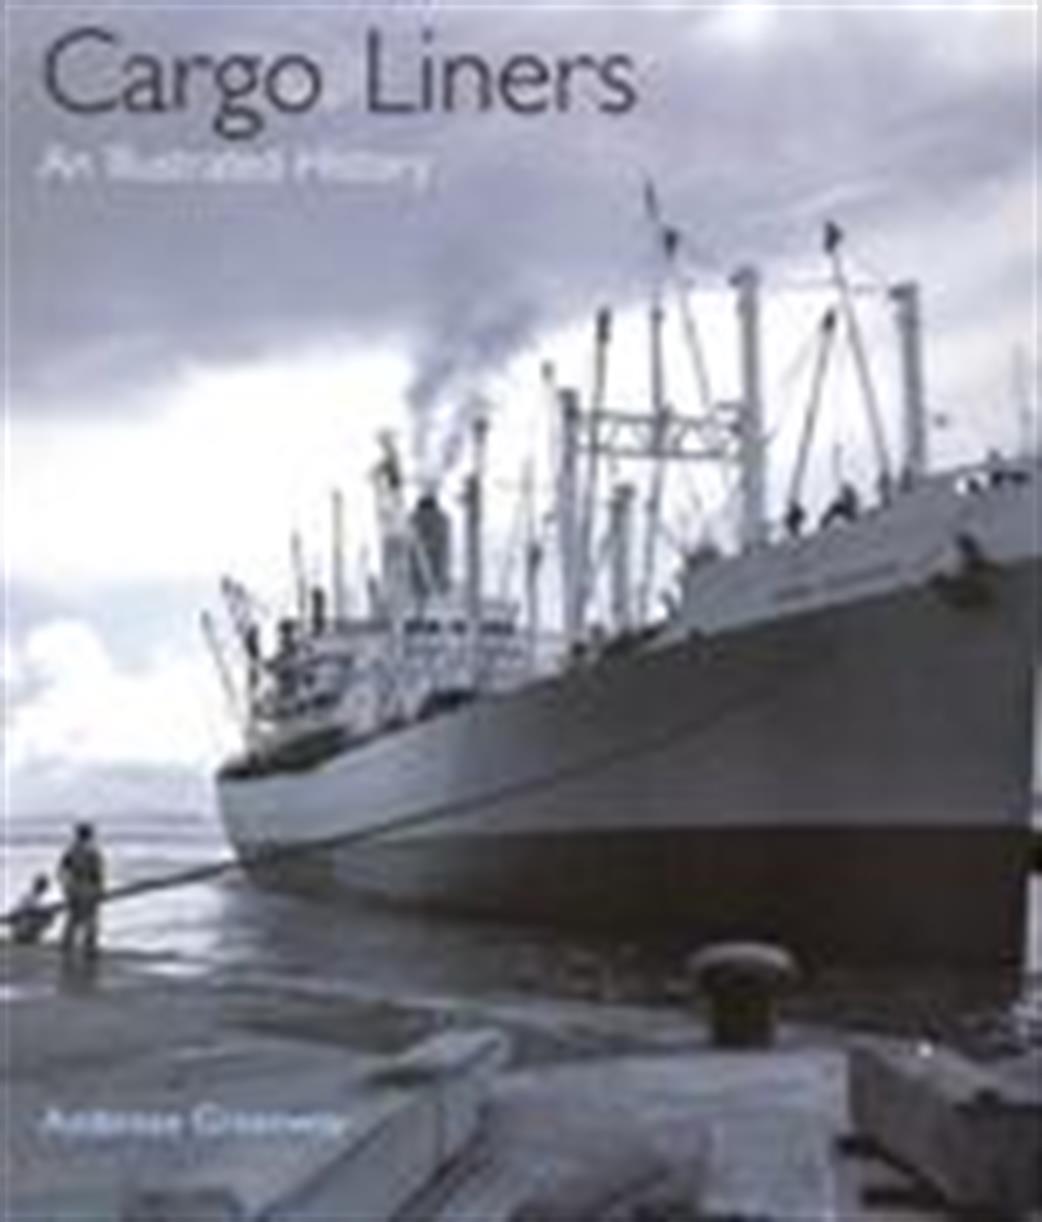 9781848321298 Cargo Liners An illustrated History by Ambrose Greenaway